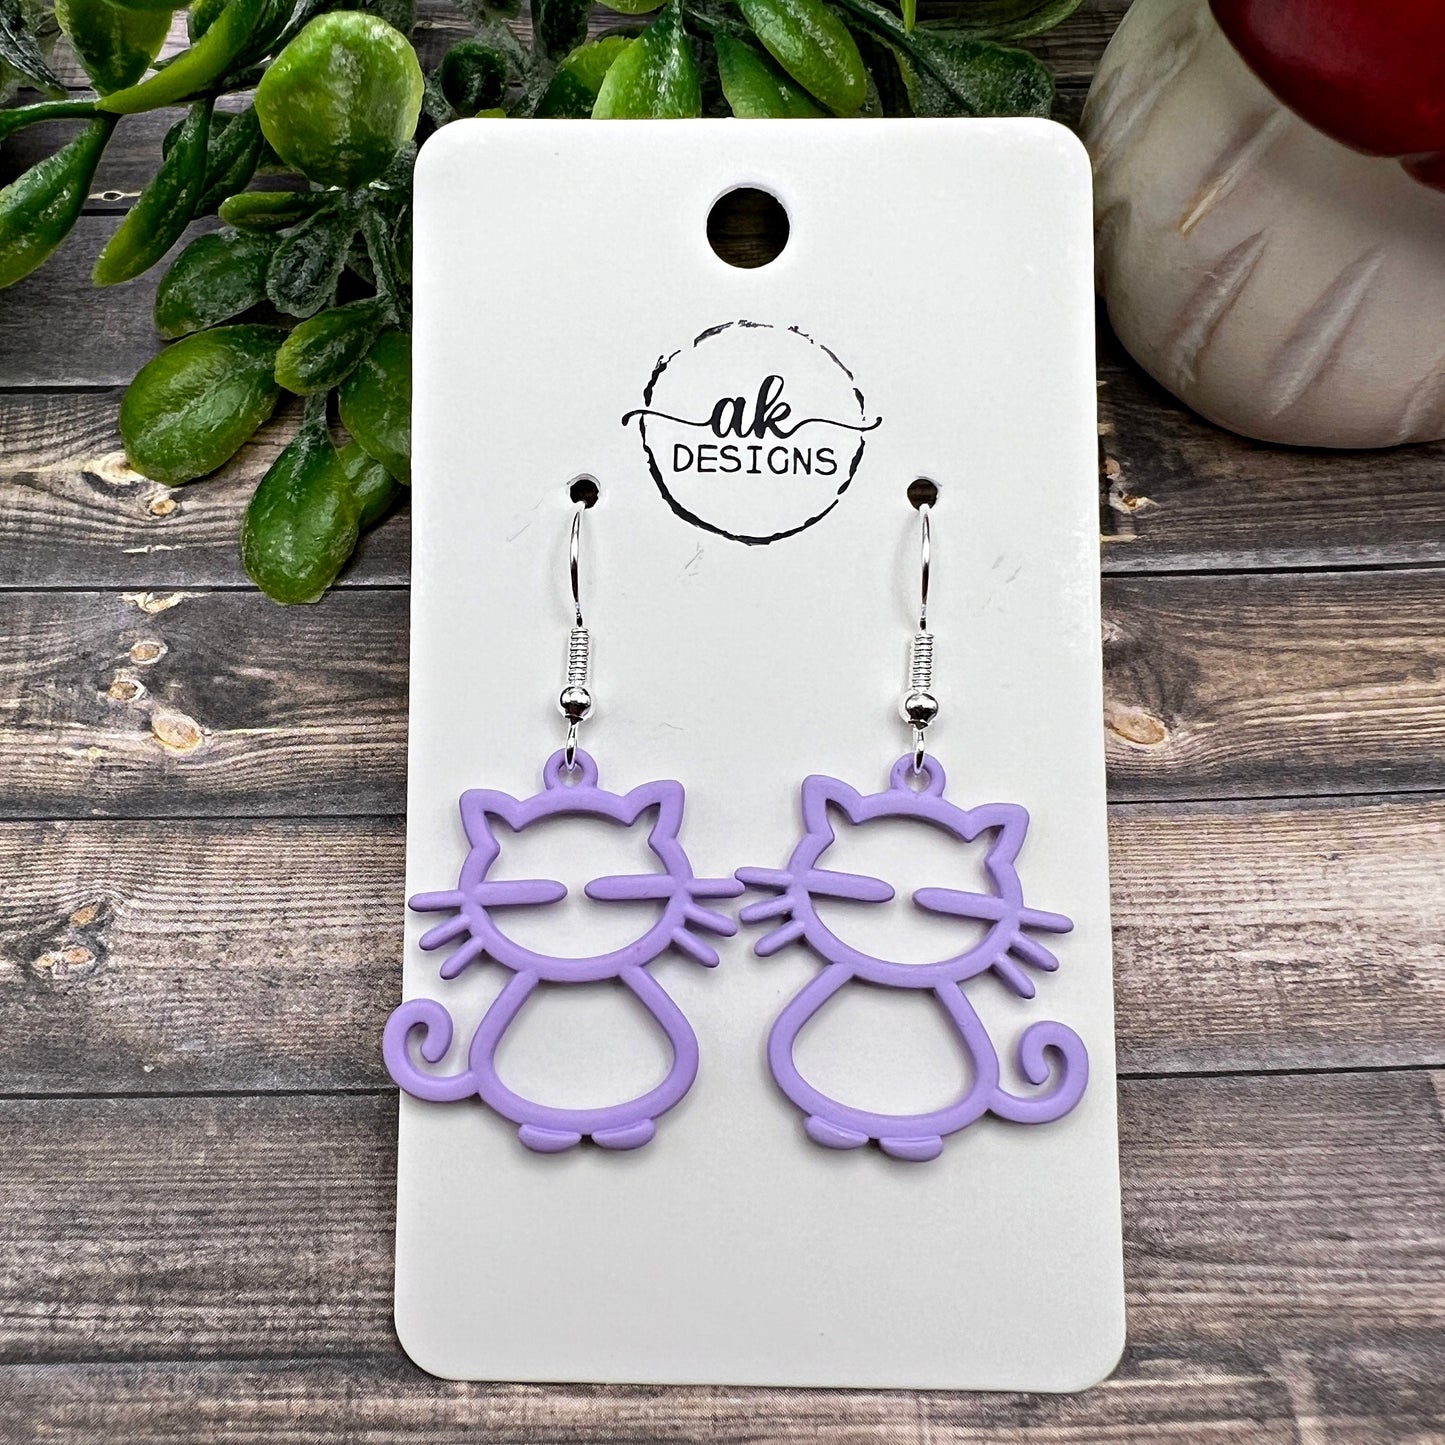 Adorable Whiskered Kitty Cat Lightweight Dangle Earrings, Choice of Colors and Hardware, Hypoallergenic